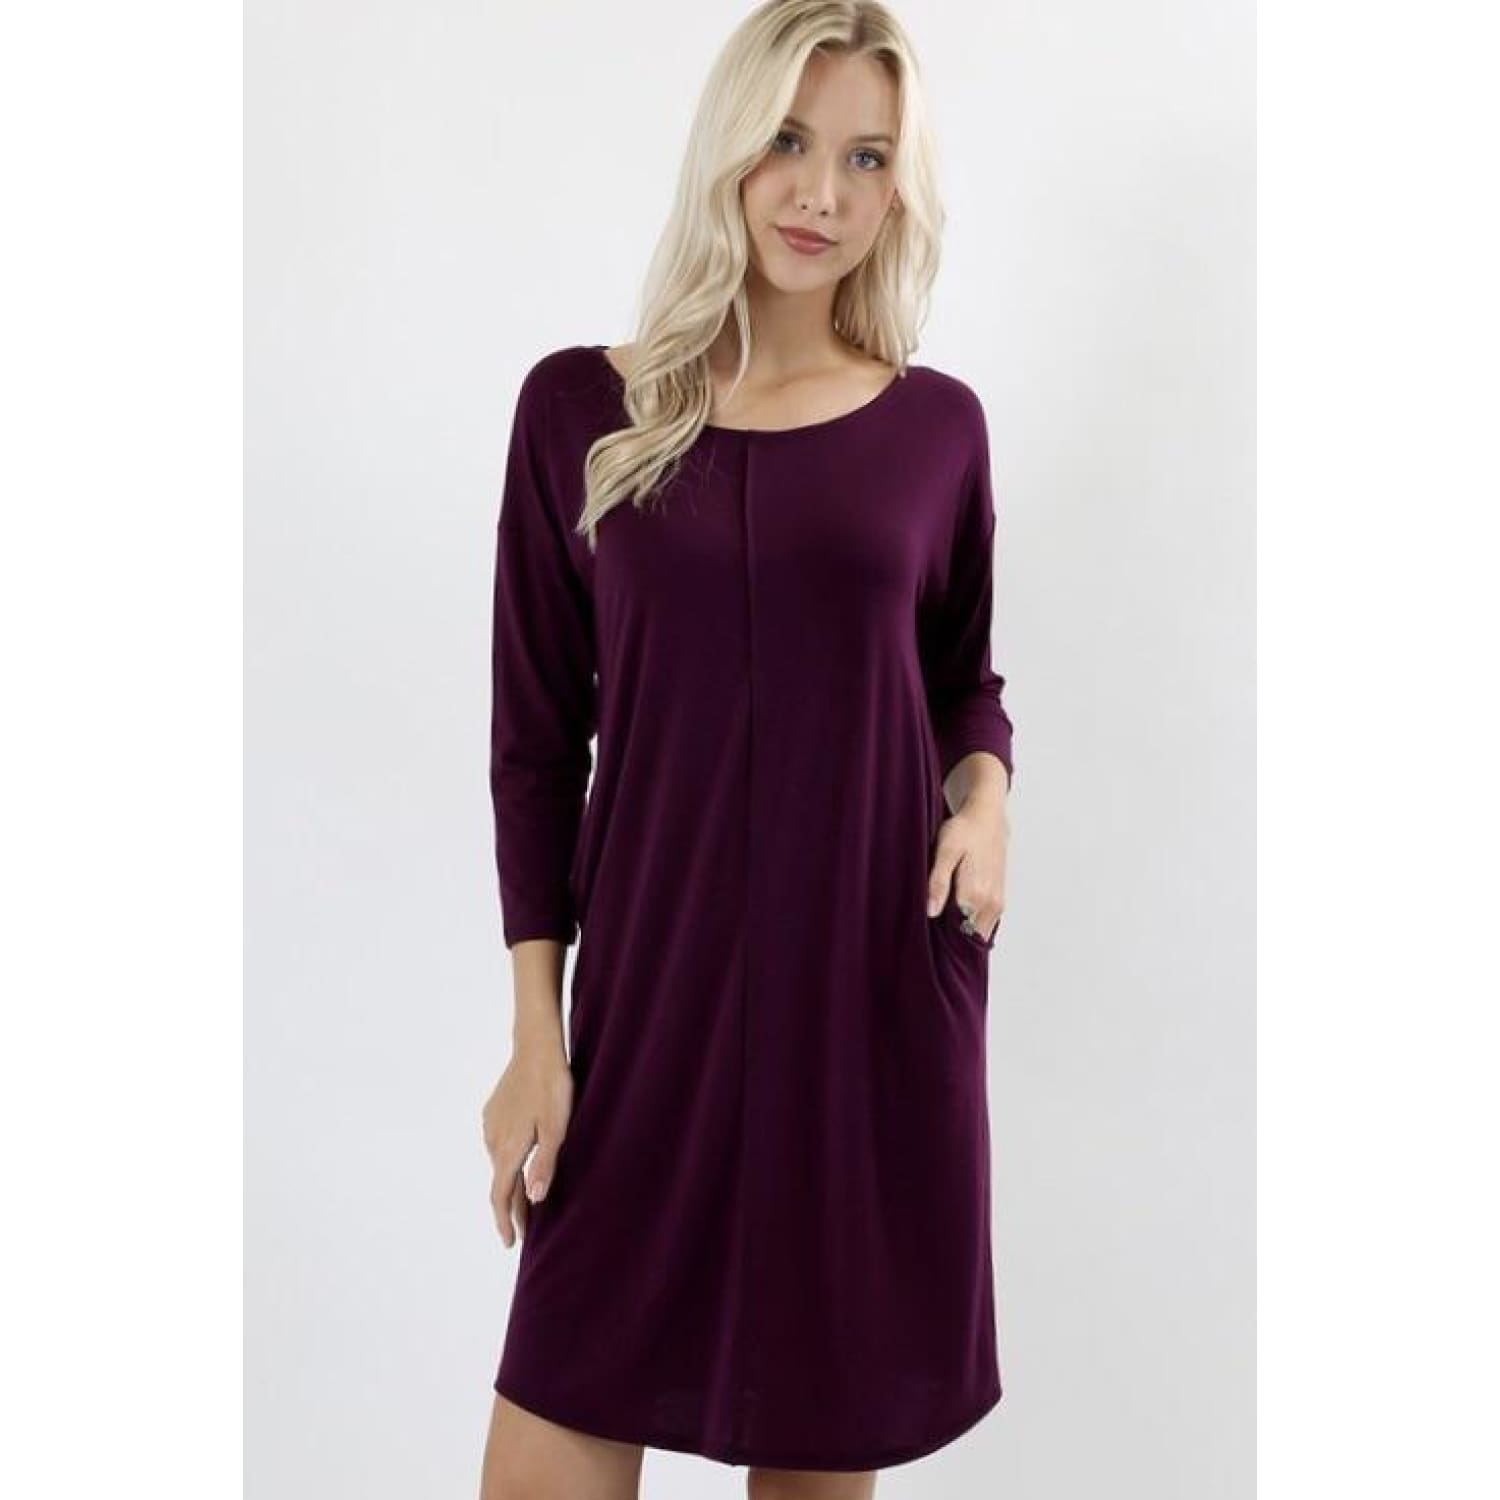 Sweet Plum Dress - Best YOU by HTS